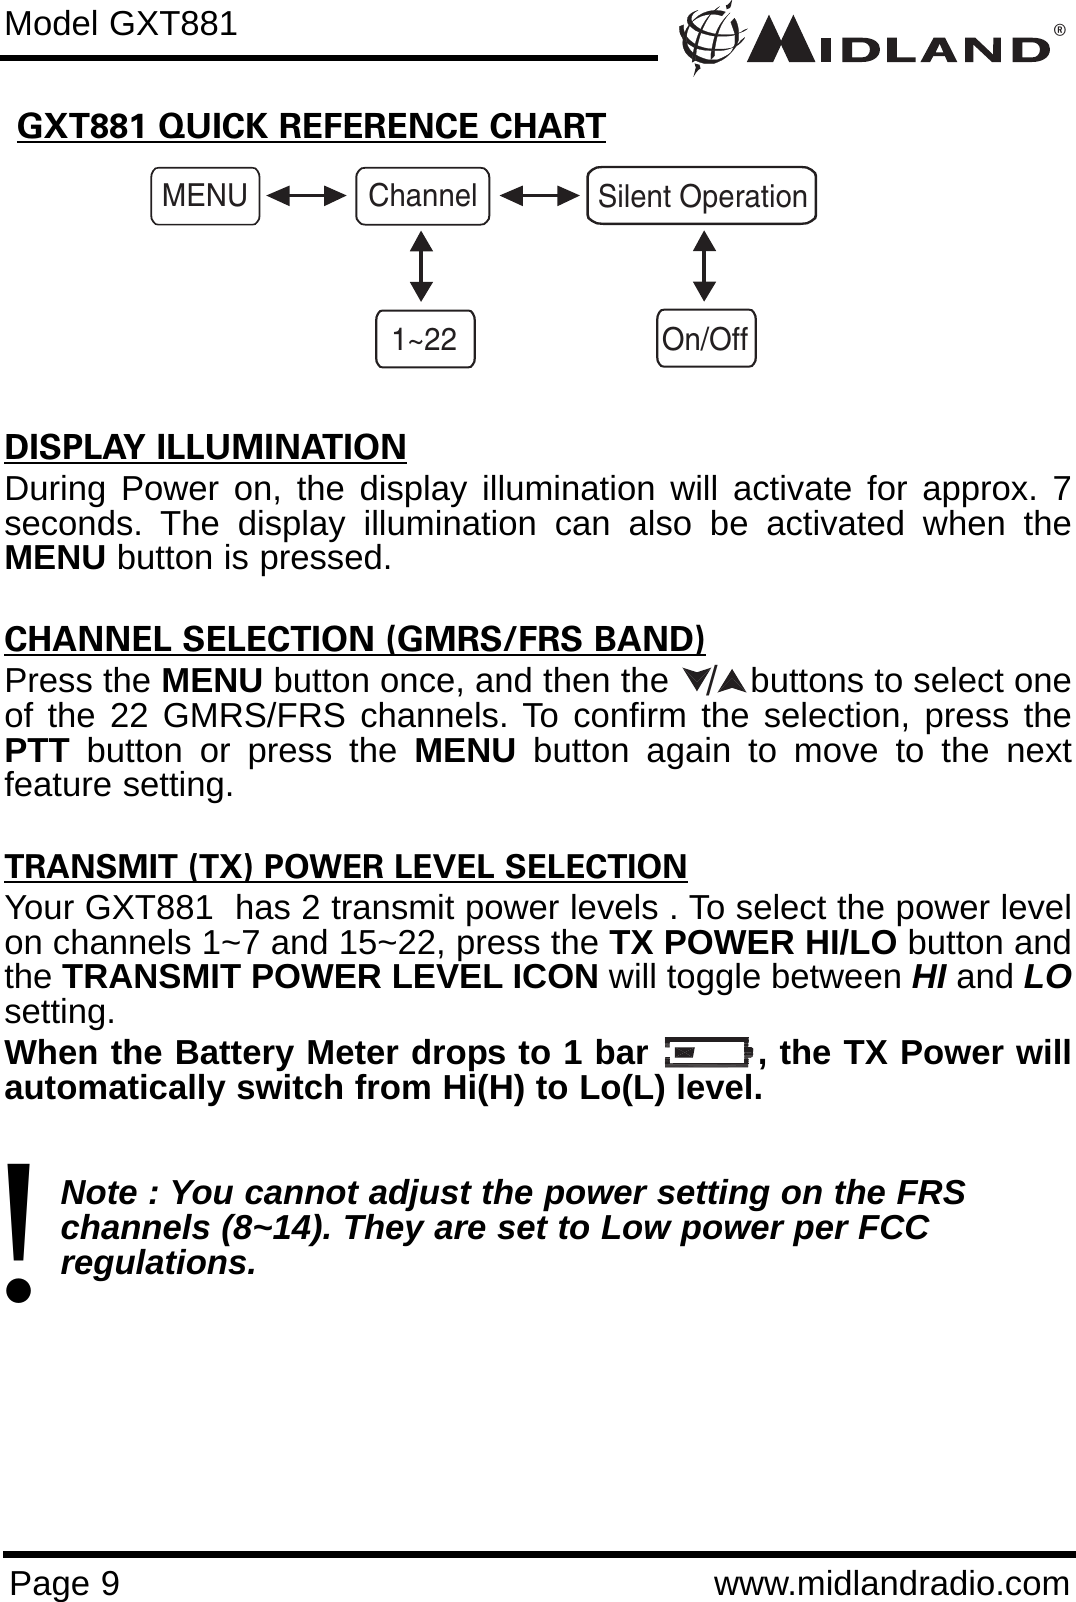 ®Page 9 www.midlandradio.comGXT881 QUICK REFERENCE CHARTModel GXT881MENU Channel1~22Silent OperationOn/OffDISPLAY ILLUMINATIONDuring Power on, the display illumination will activate for approx. 7seconds. The display illumination can also be activated when theMENU button is pressed.CHANNEL SELECTION (GMRS/FRS BAND)Press the MENU button once, and then the        buttons to select oneof the 22 GMRS/FRS channels. To confirm the selection, press thePTT button or press the MENU button again to move to the nextfeature setting.TRANSMIT (TX) POWER LEVEL SELECTIONYour GXT881  has 2 transmit power levels . To select the power levelon channels 1~7 and 15~22, press the TX POWER HI/LO button andthe TRANSMIT POWER LEVEL ICON will toggle between HI and LOsetting.When the Battery Meter drops to 1 bar         , the TX Power willautomatically switch from Hi(H) to Lo(L) level.Note : You cannot adjust the power setting on the FRS   channels (8~14). They are set to Low power per FCC          regulations./!